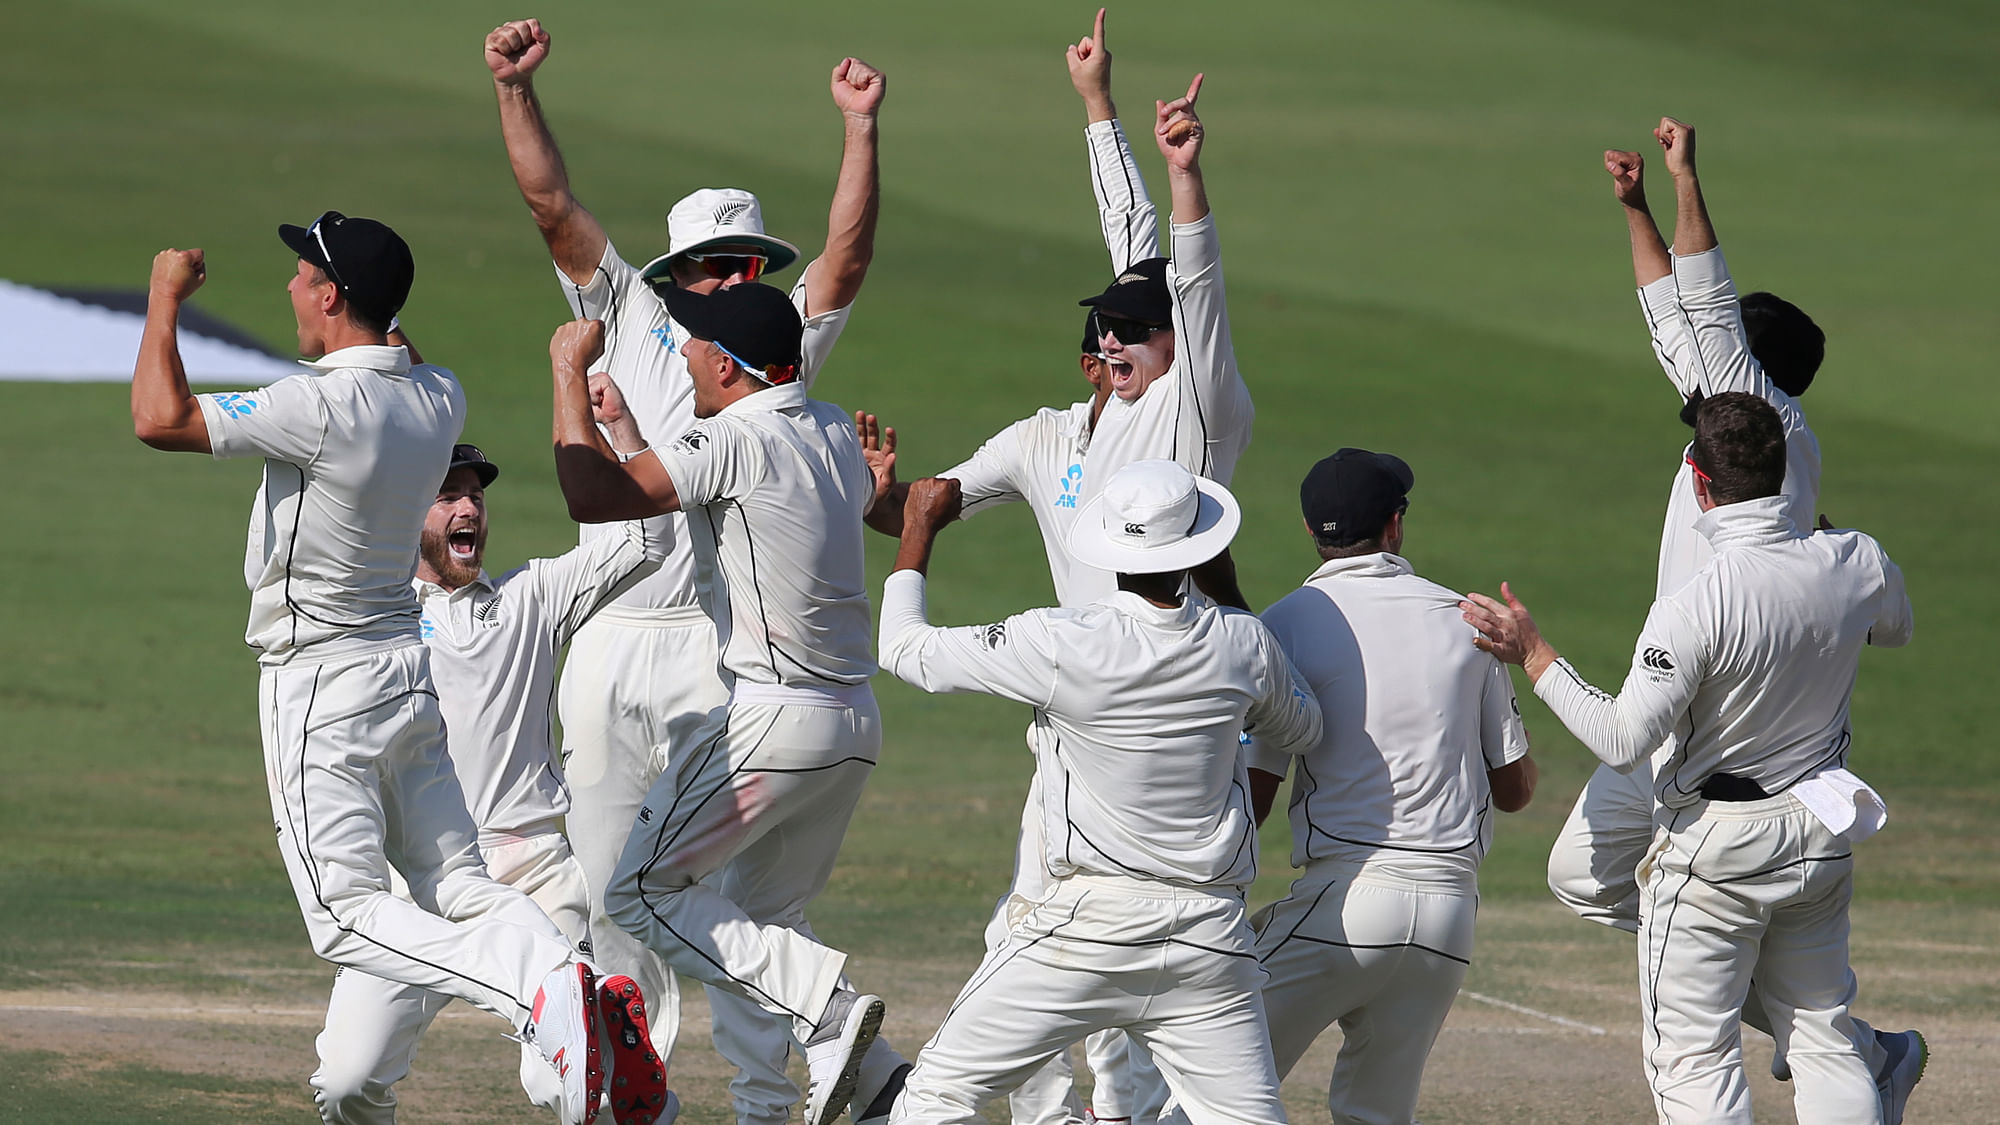 New Zealand players celebrate after beating Pakistan by 4 runs in the first Test in Abu Dhabi, United Arab Emirates, Monday, Nov. 19, 2018.&nbsp;